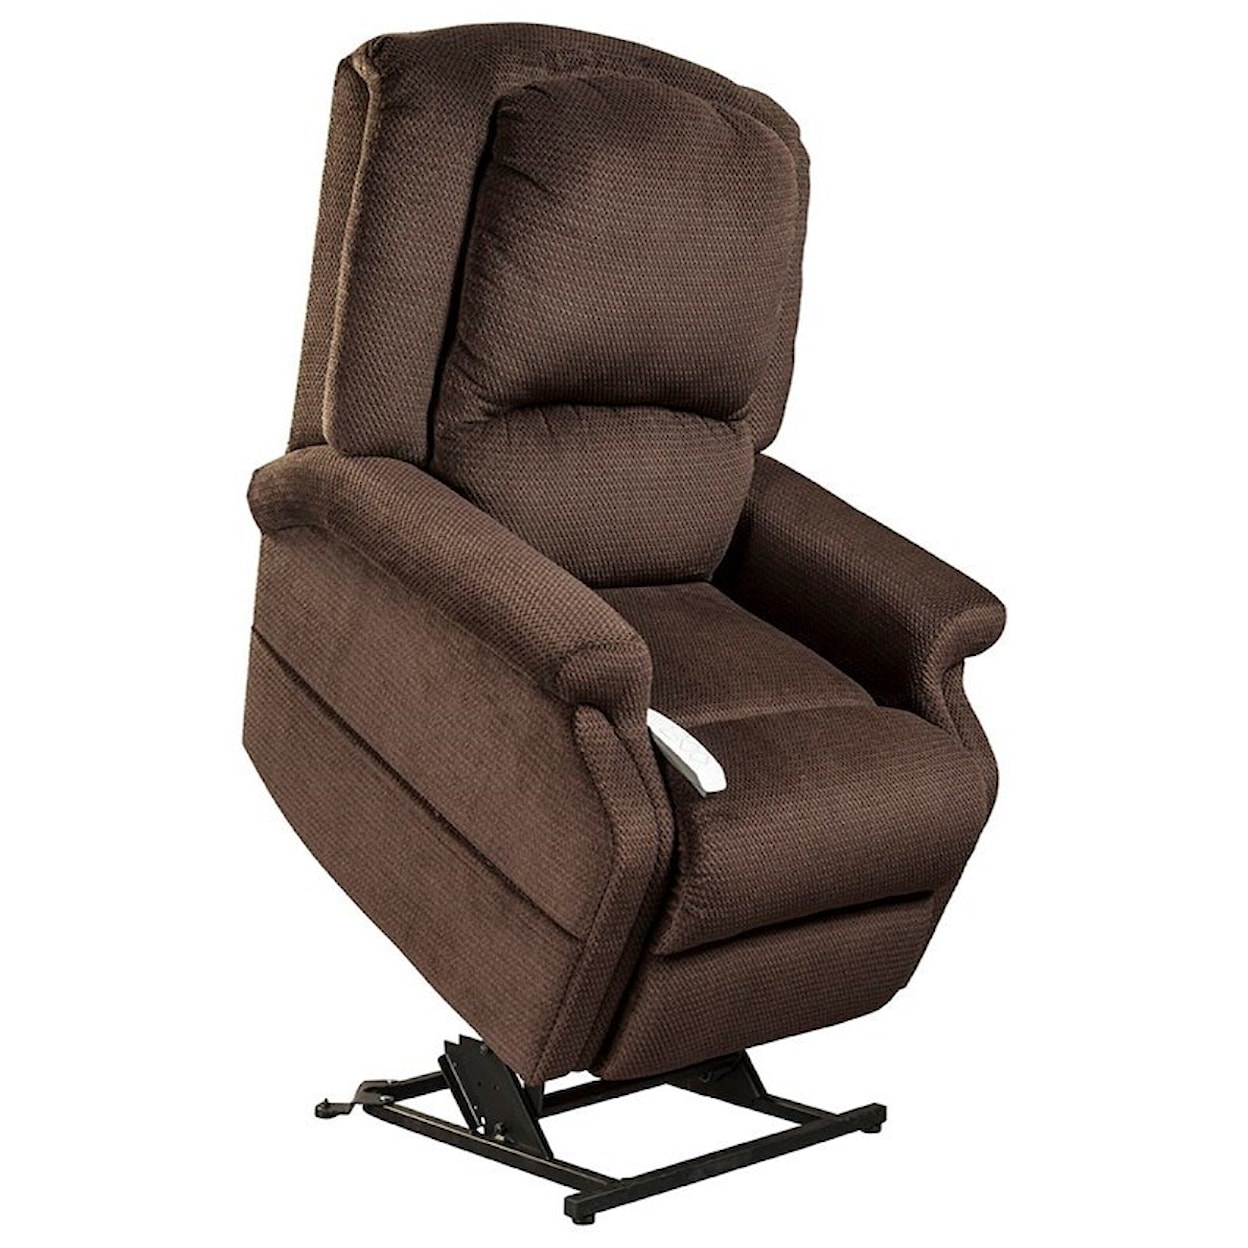 Ultimate Power Recliner Lift Chairs Stardust Zero Gravity Chaise Lounger